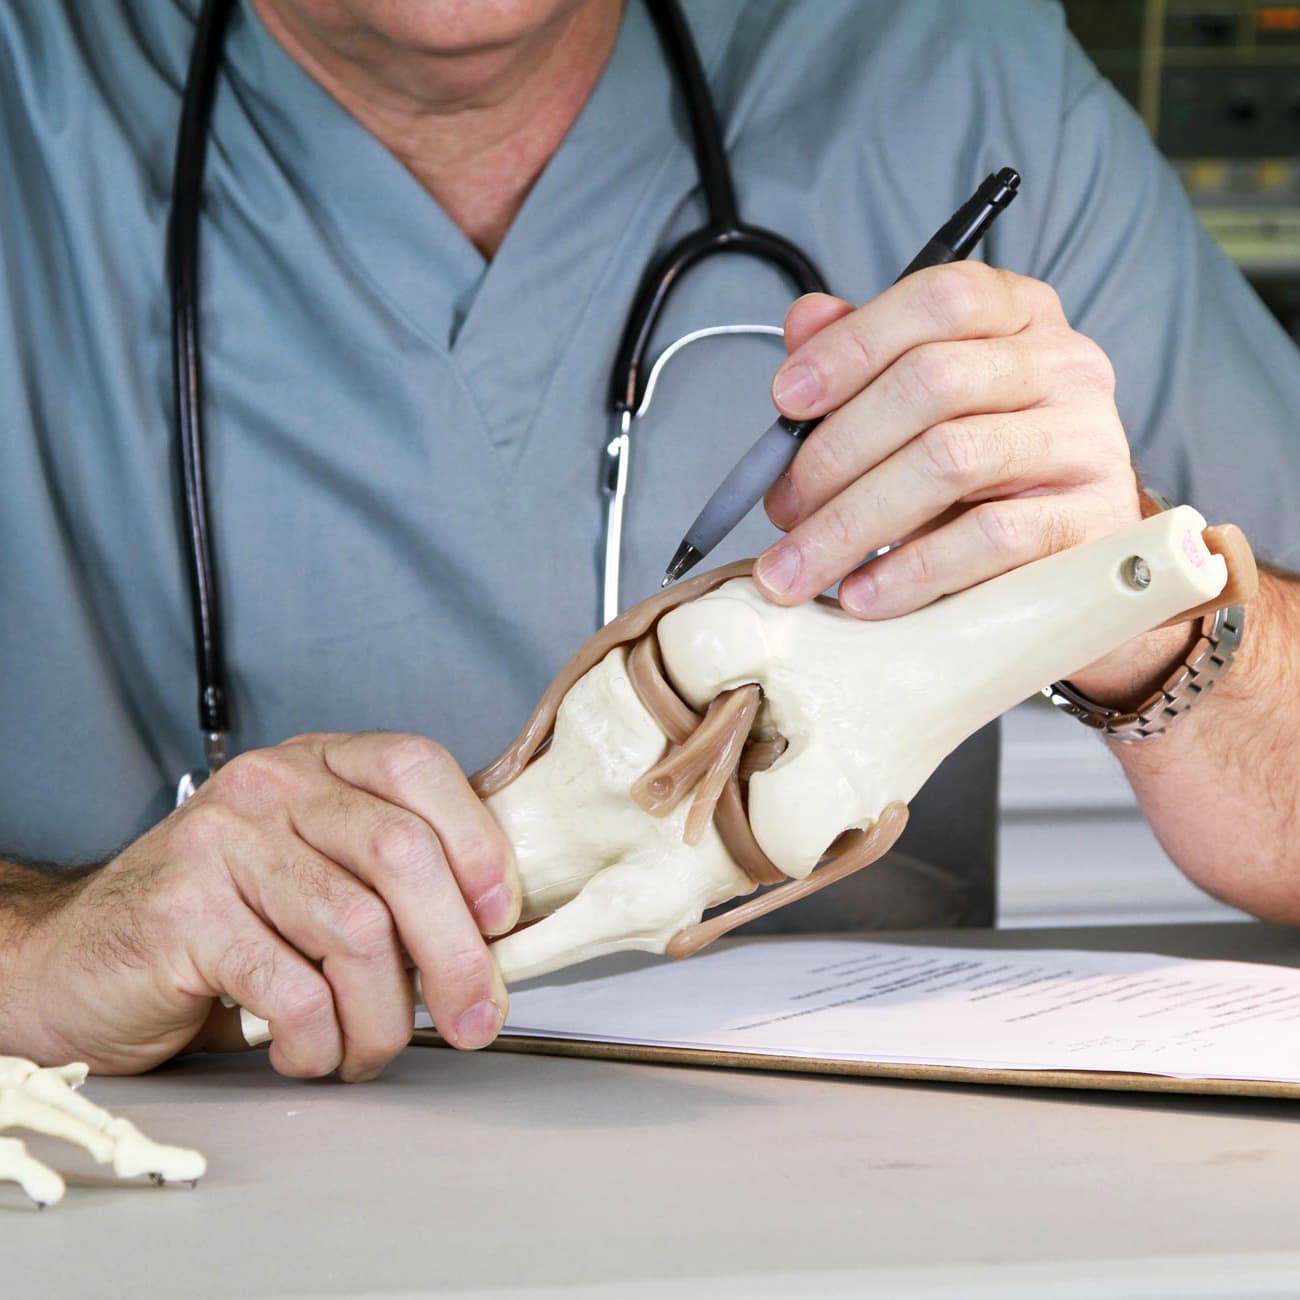 What Will You Ask The Knee Replacement Specialist?